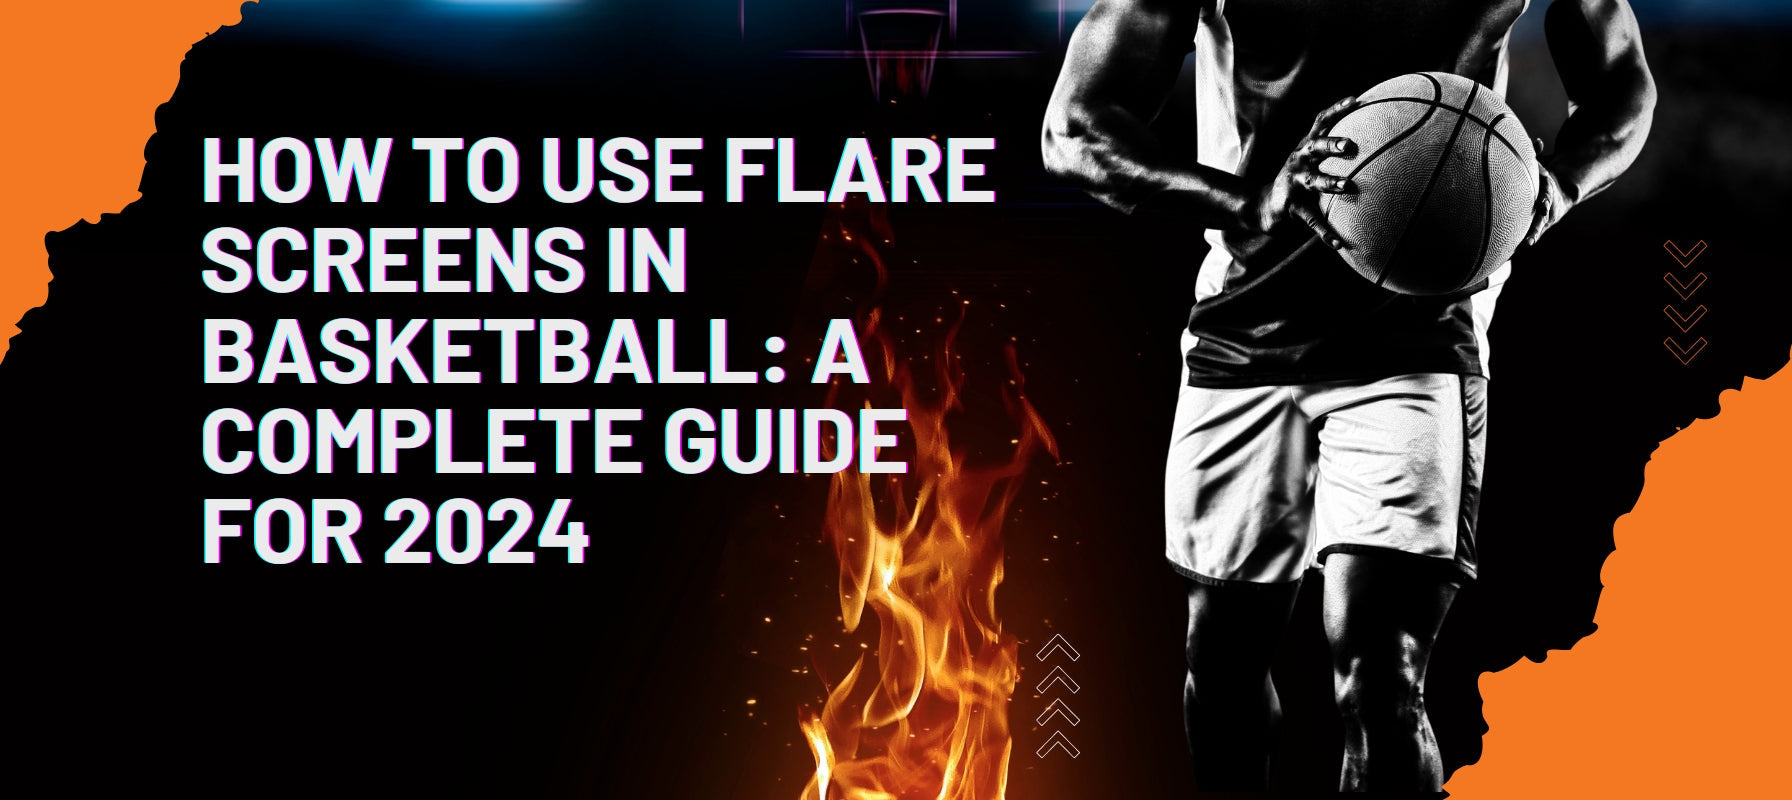 Flare Screens in Basketball